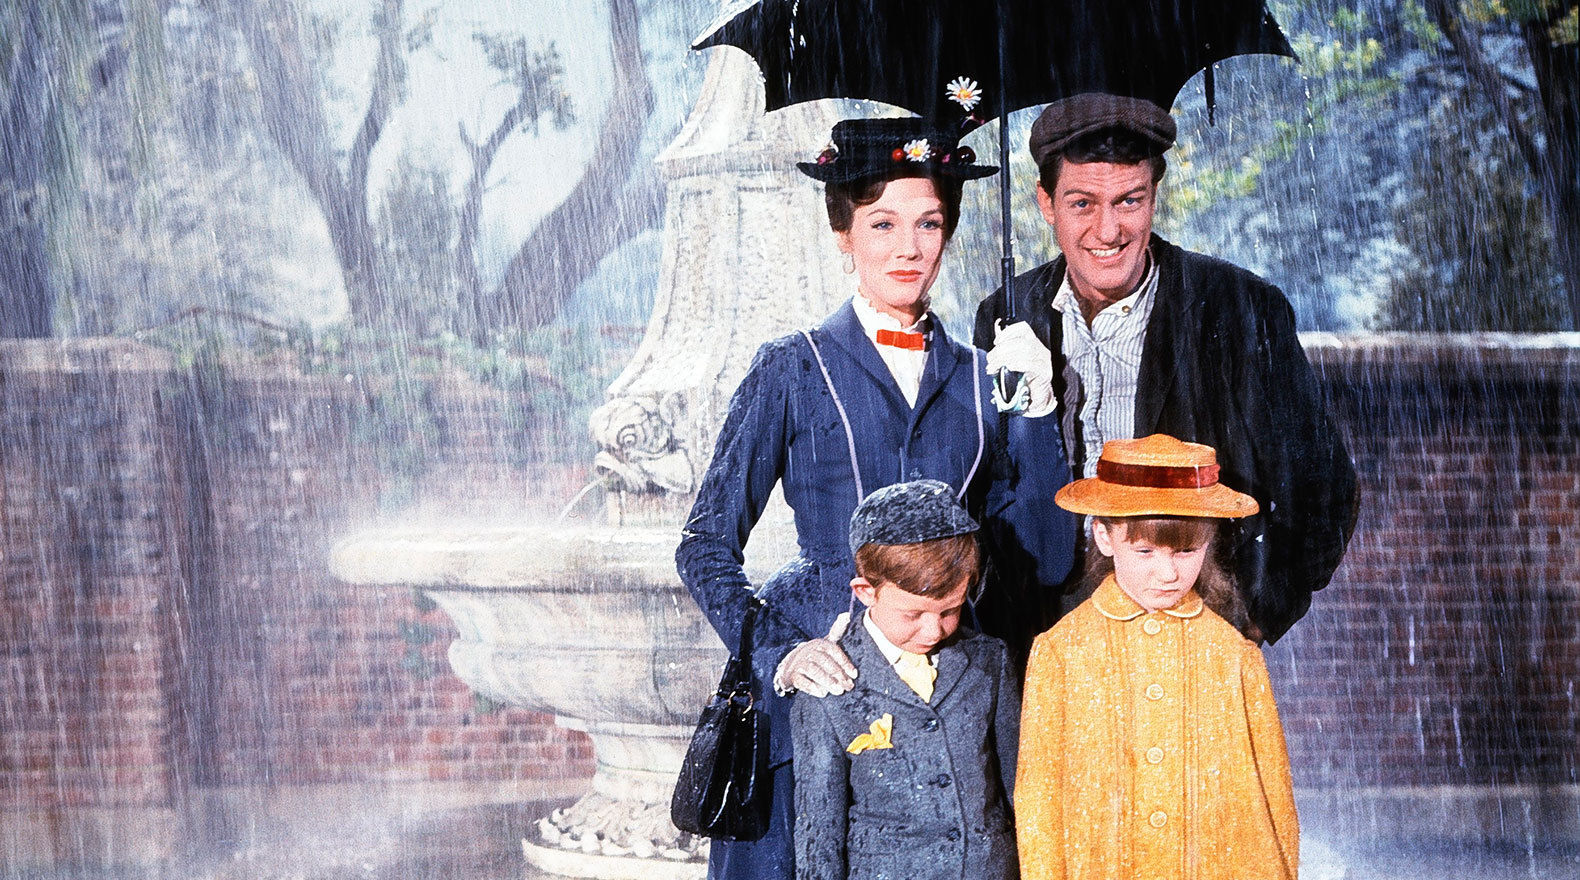 Mary Poppins Backgrounds, Compatible - PC, Mobile, Gadgets| 1580x880 px